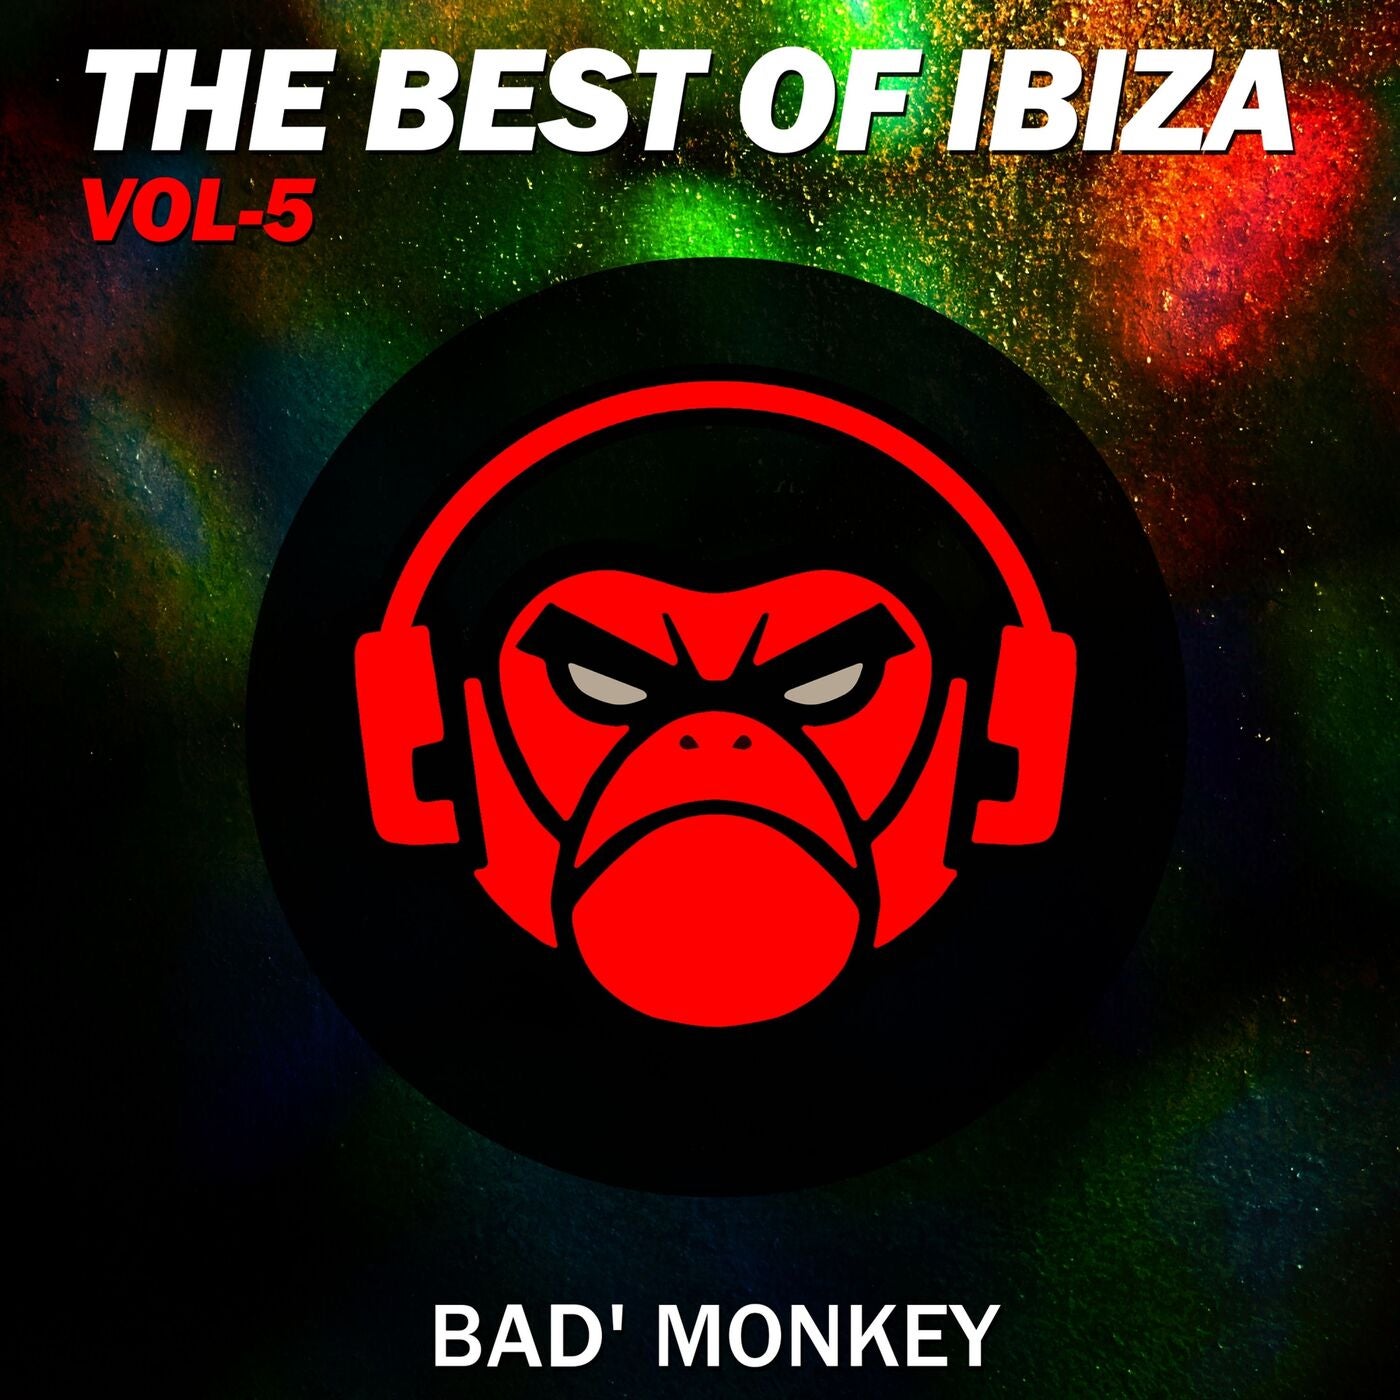 The Best of Ibiza Vol.5, compiled by Bad Monkey